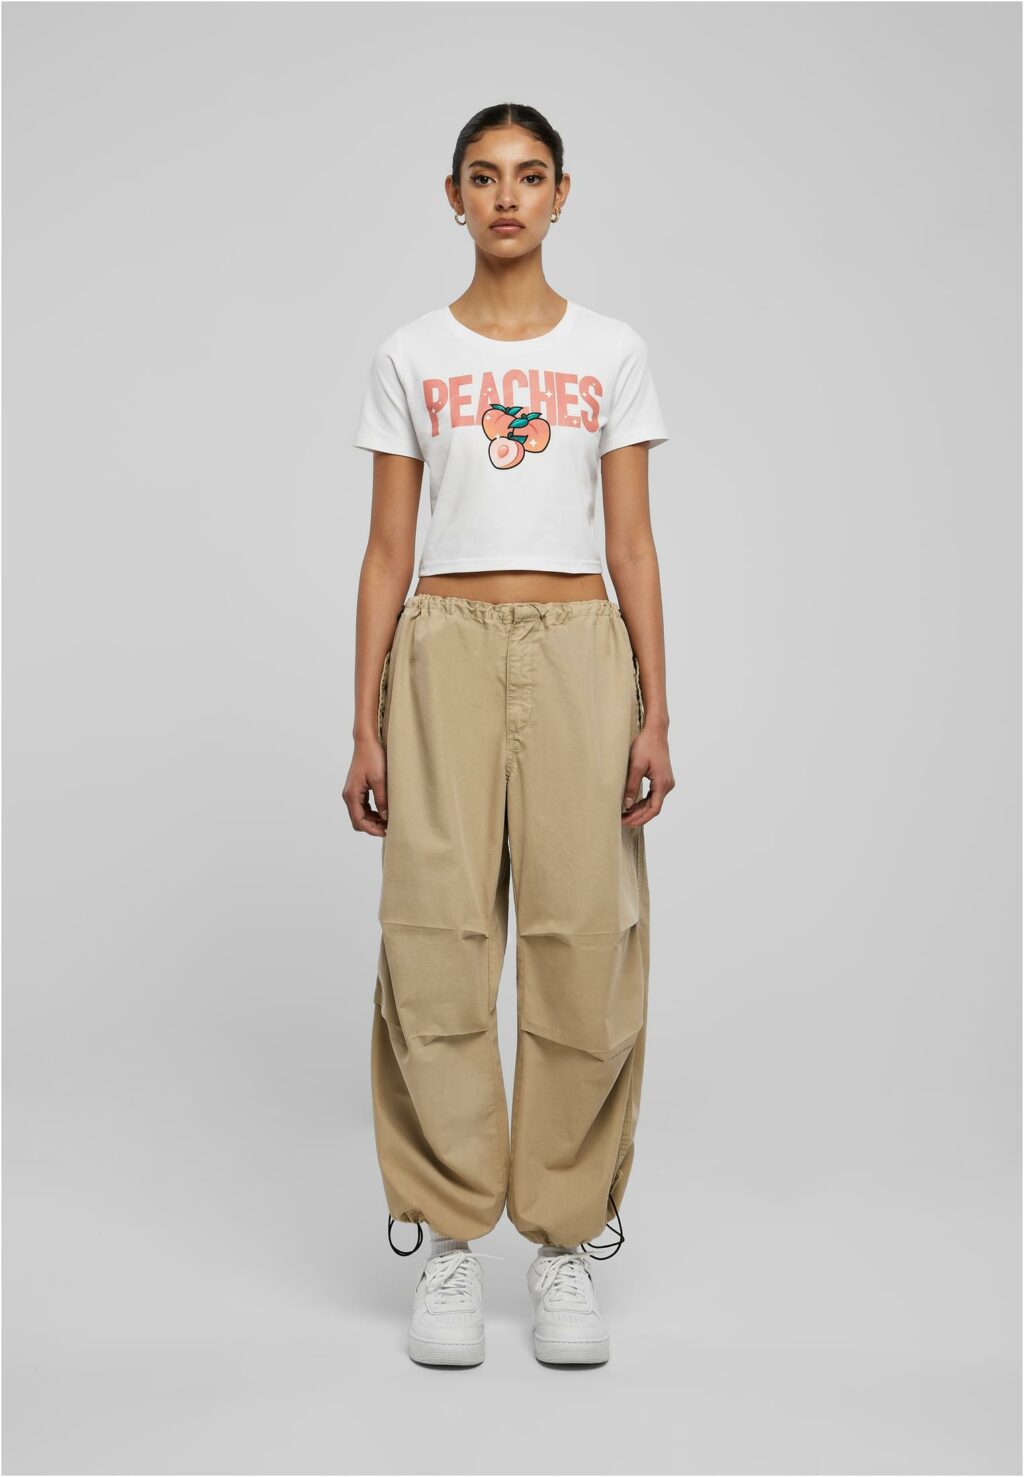 Peaches Cropped Tee white MST011